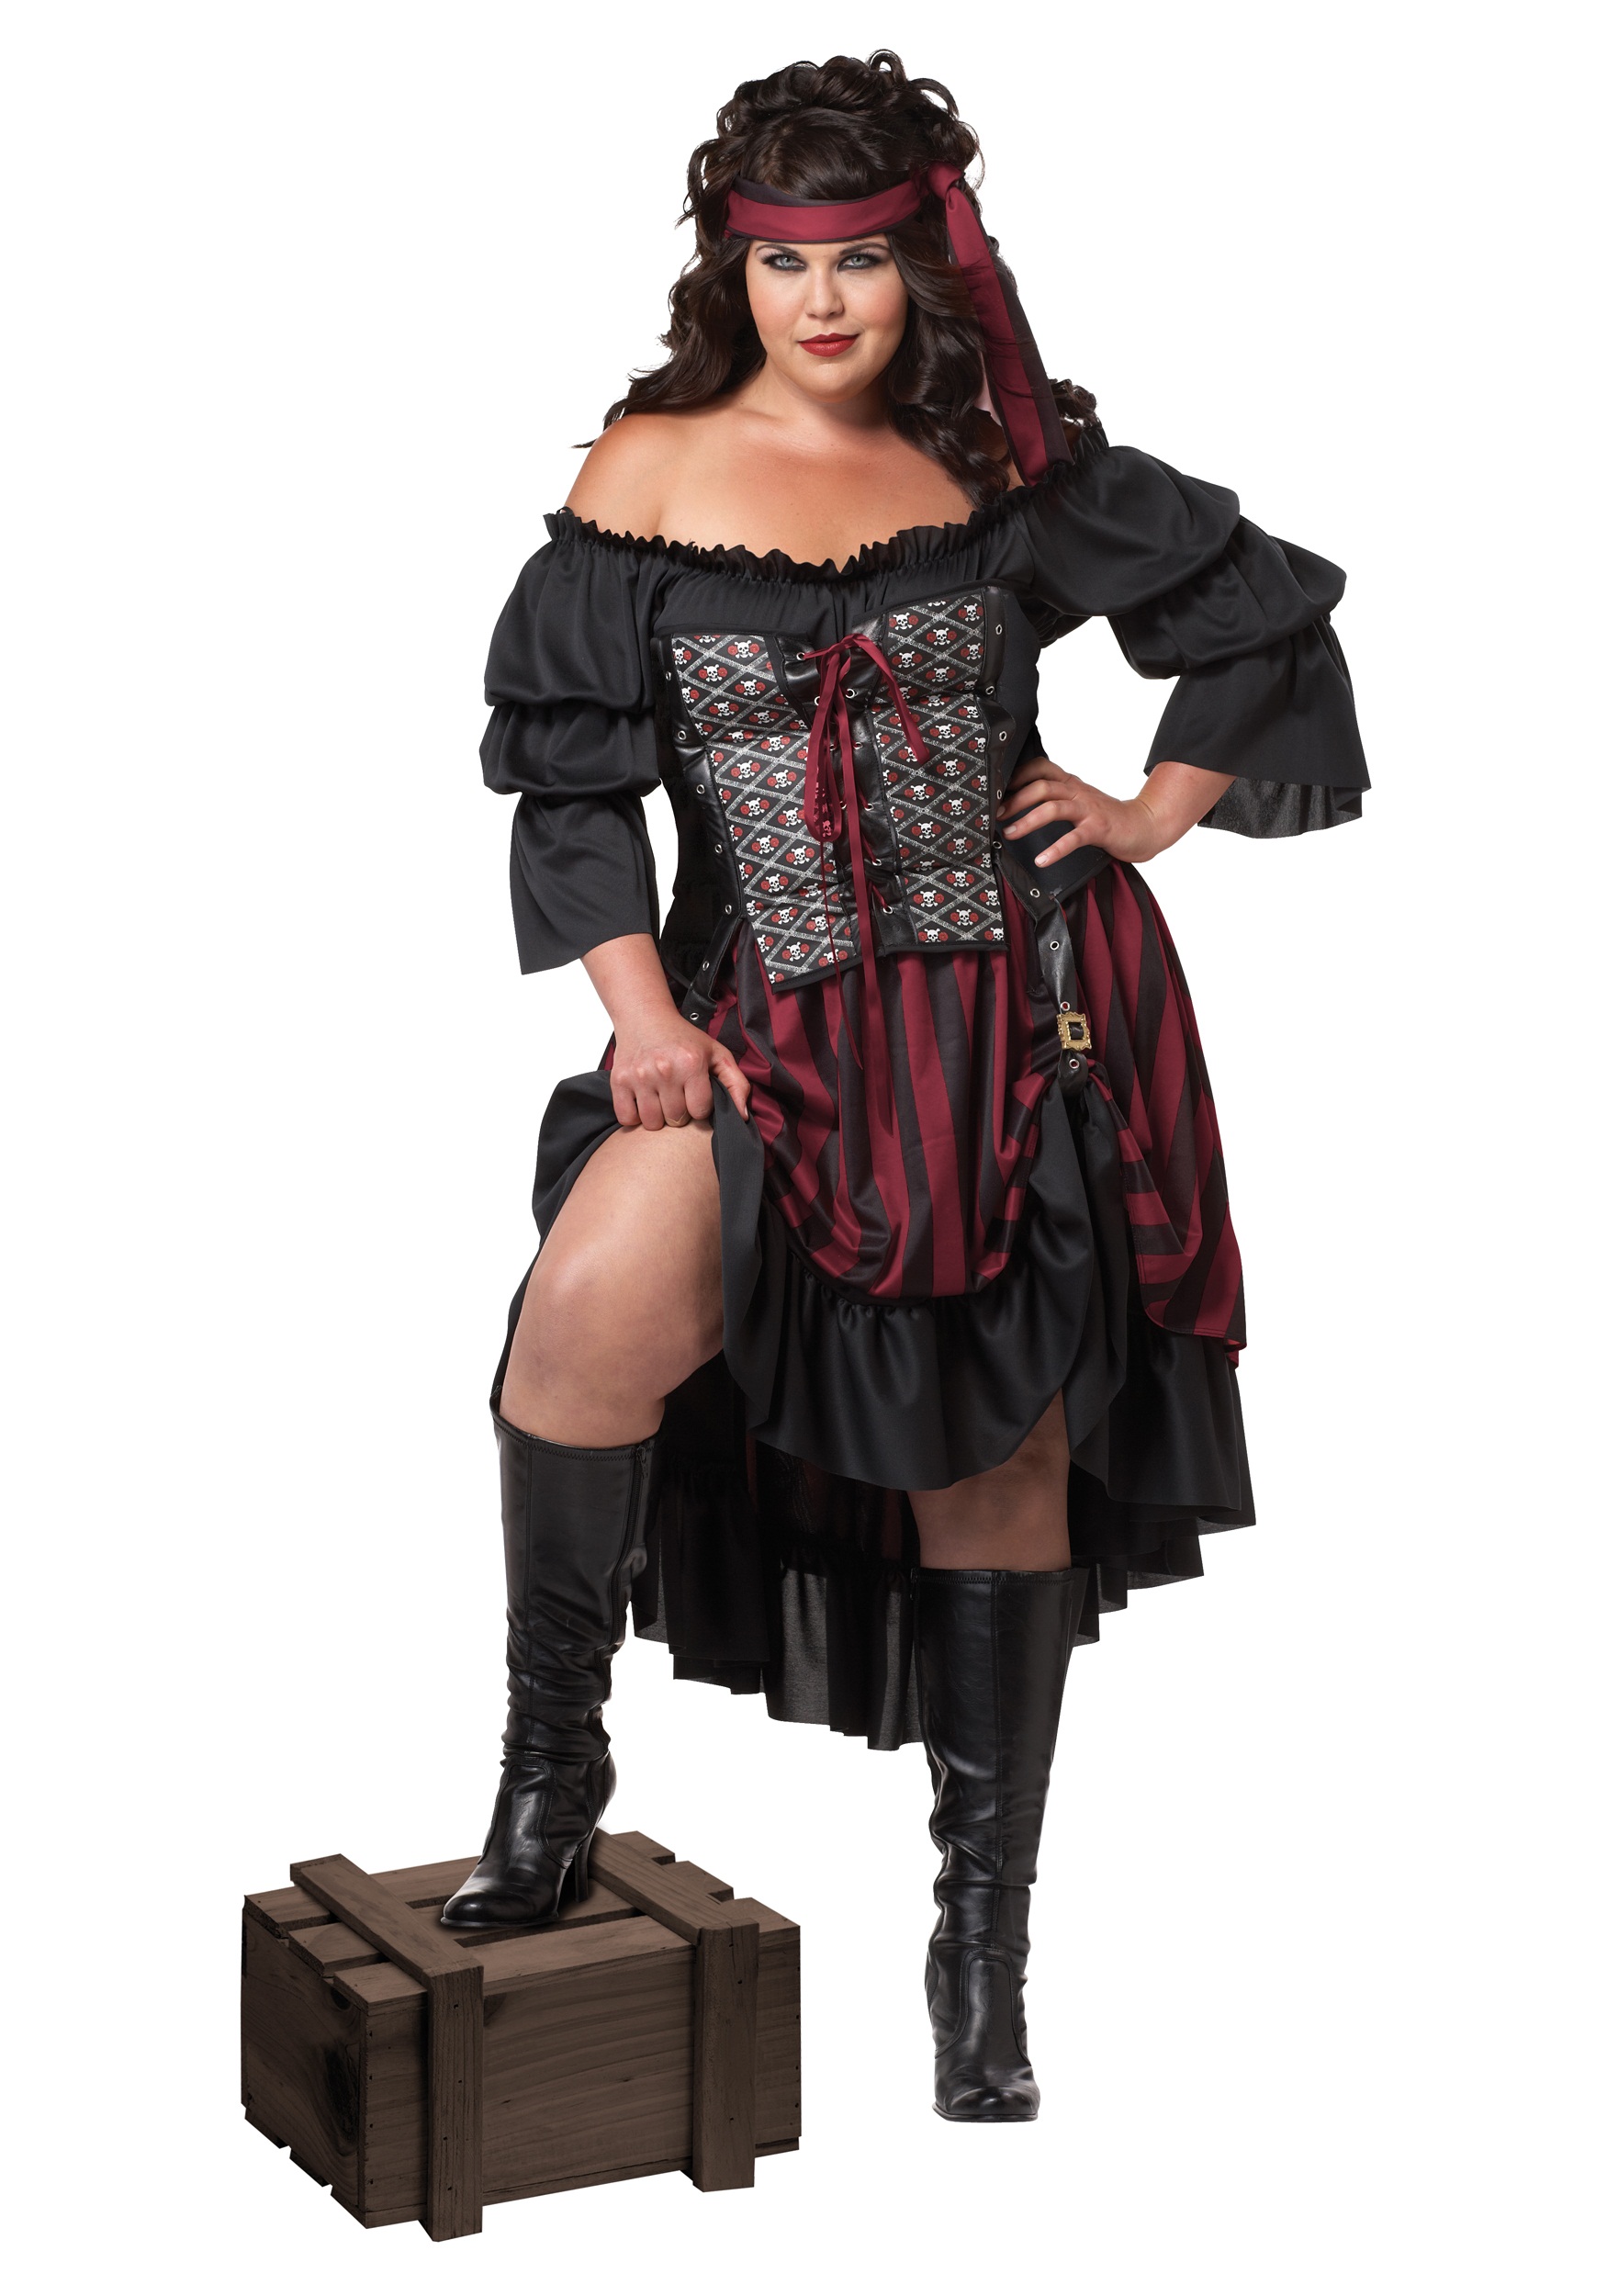 Plus Size Pirate Wench Costume Womens Pirate Halloween Costume 3045